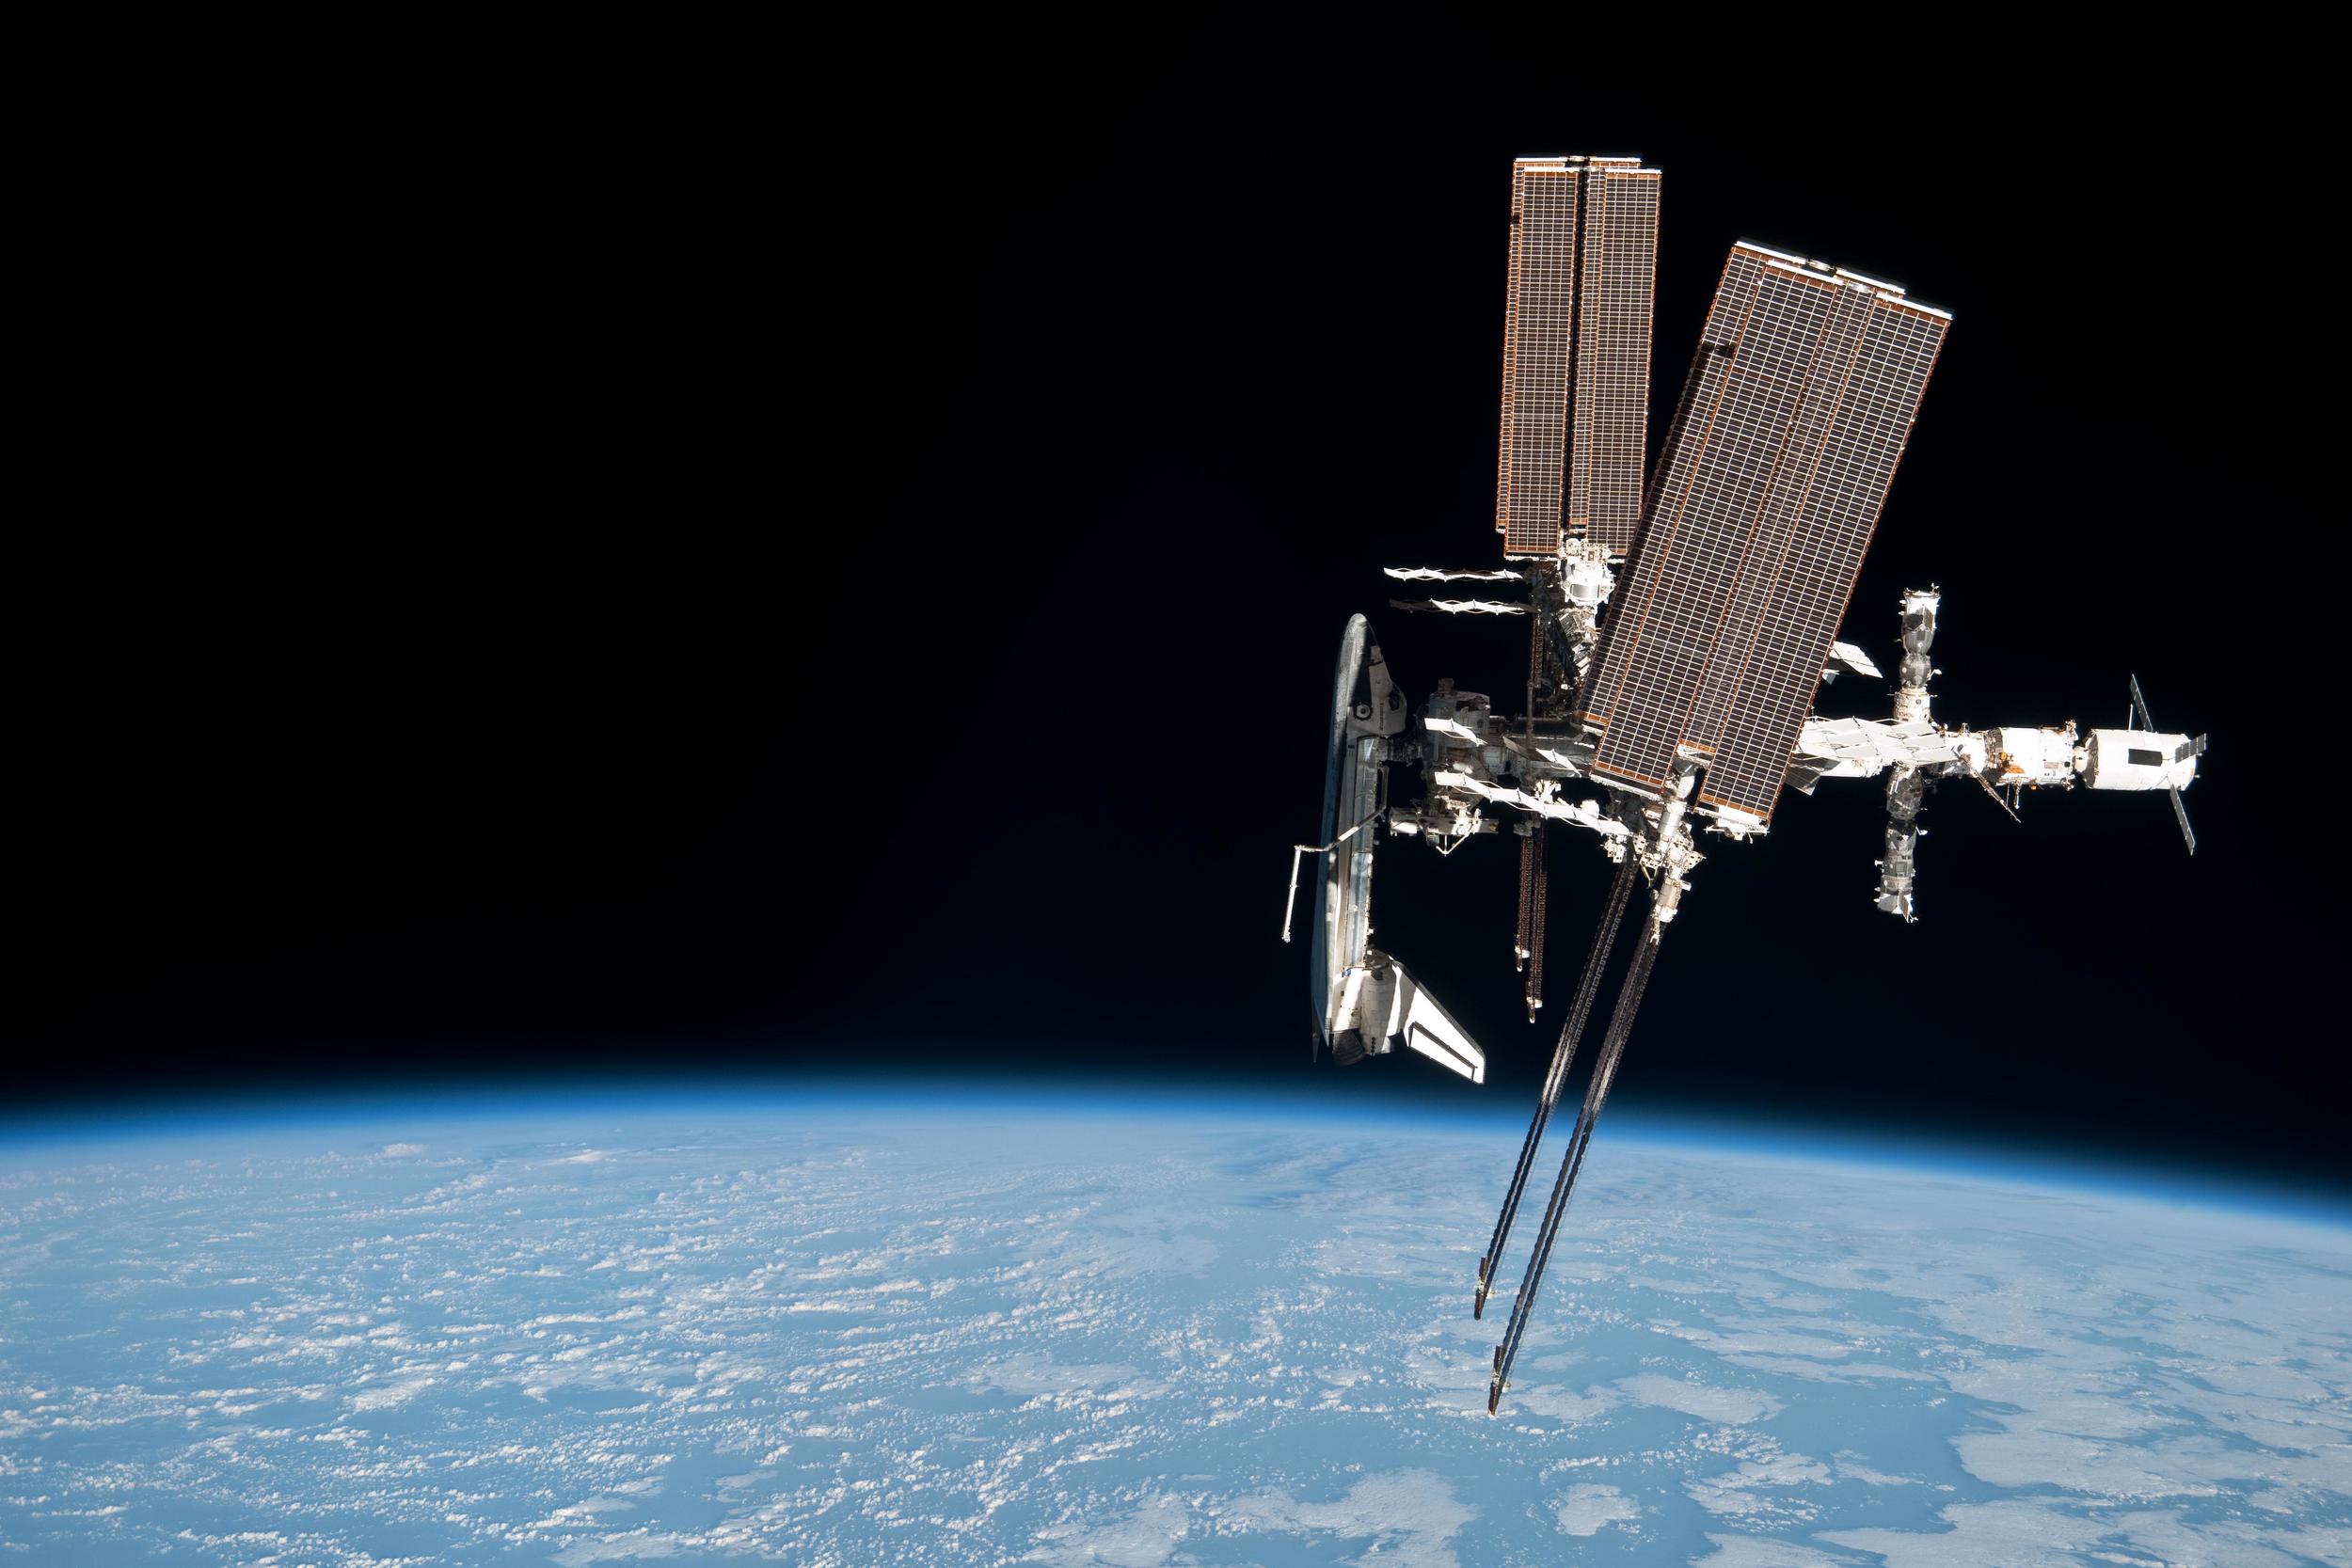  The space shuttle  Endeavour  is seen docked with the ISS by a departing Soyuz crew. Photo Credit: NASA 